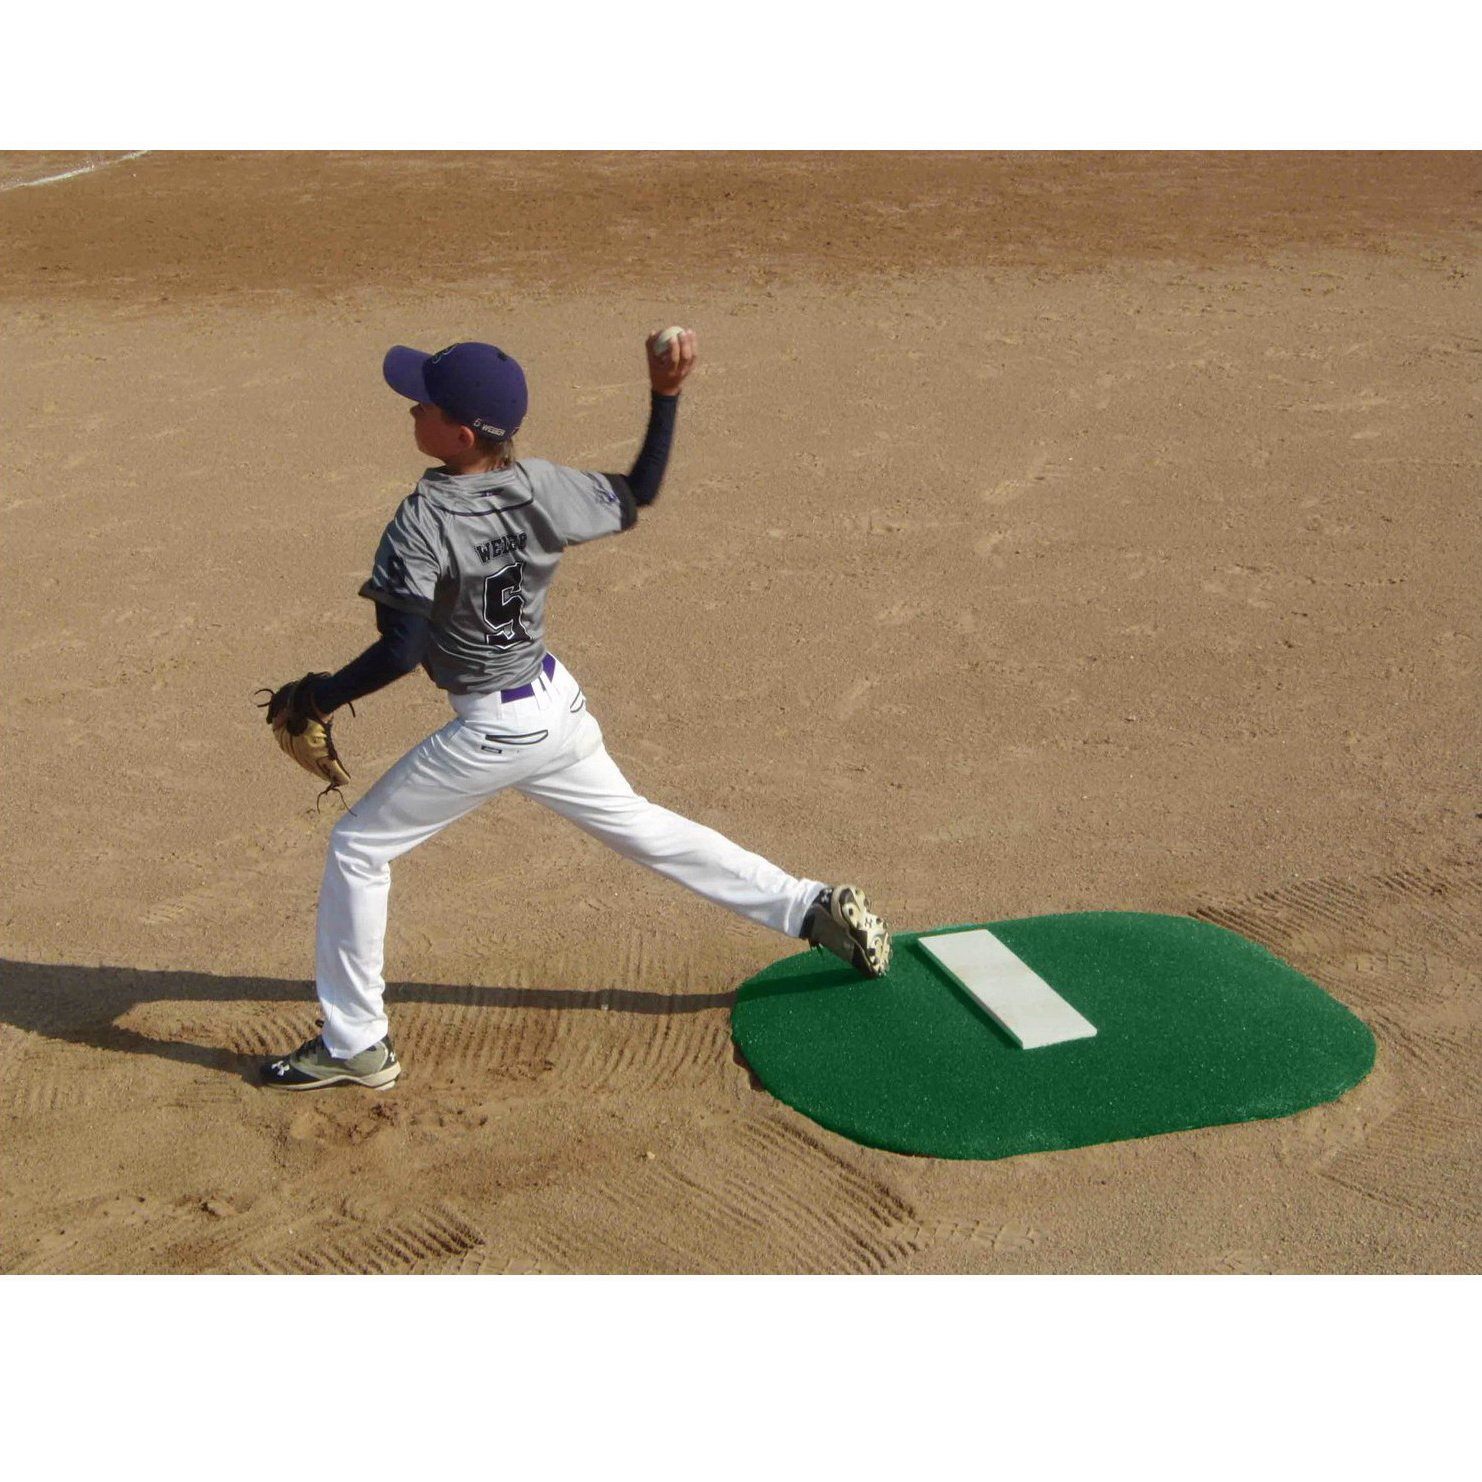 PortoLite 4" Stride Off Little League Portable Game Pitching Mound